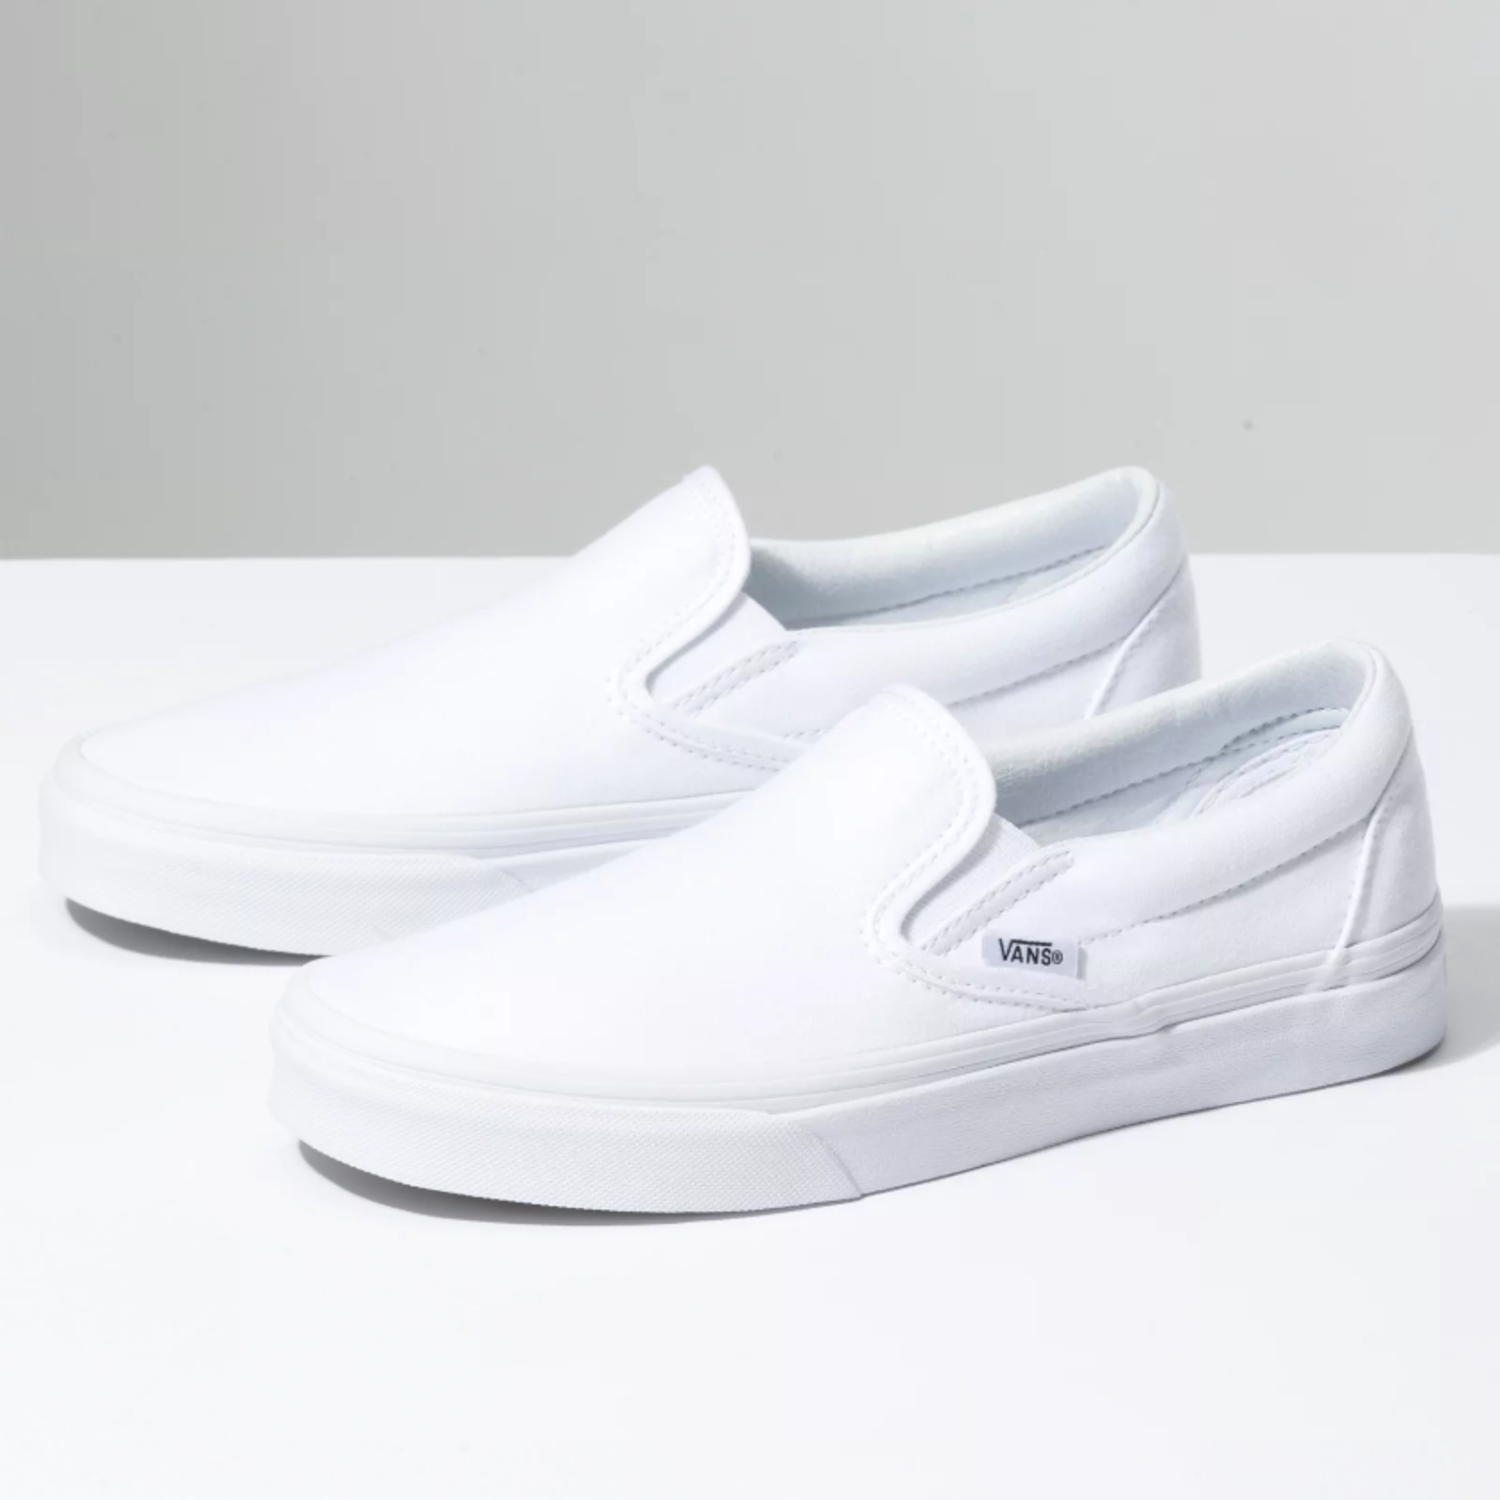 solid white high top vans